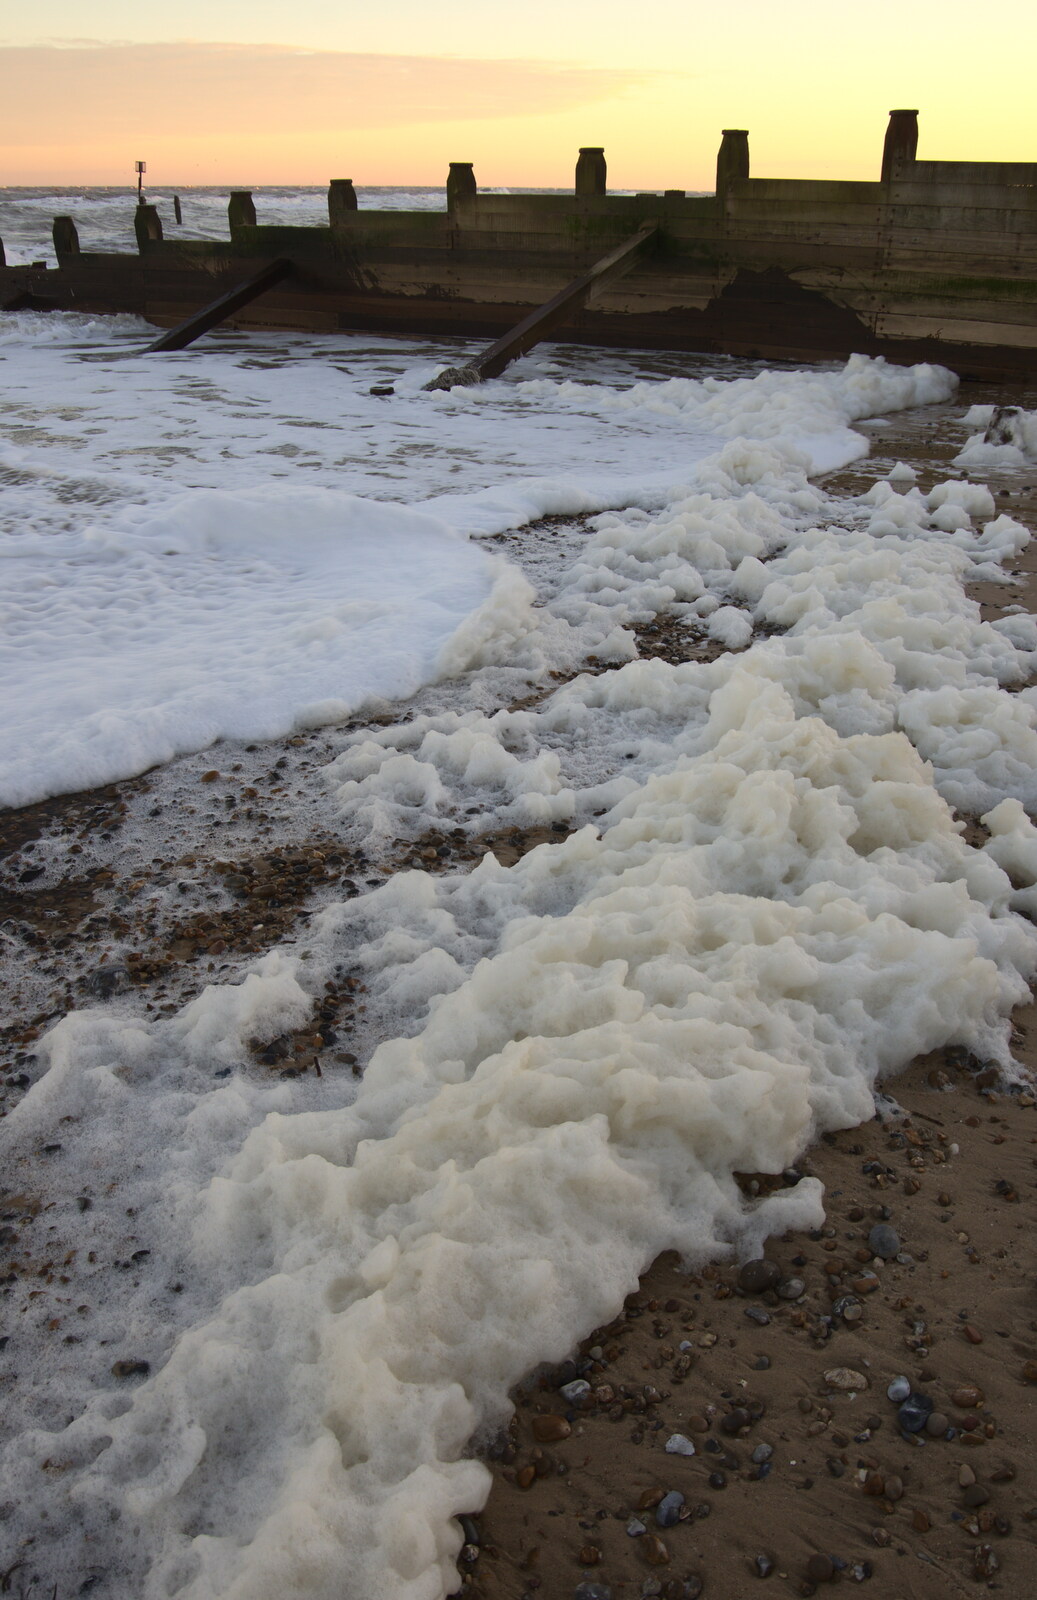 More wibbly sea foam from Sunset at the Beach, Southwold, Suffolk - 18th November 2018